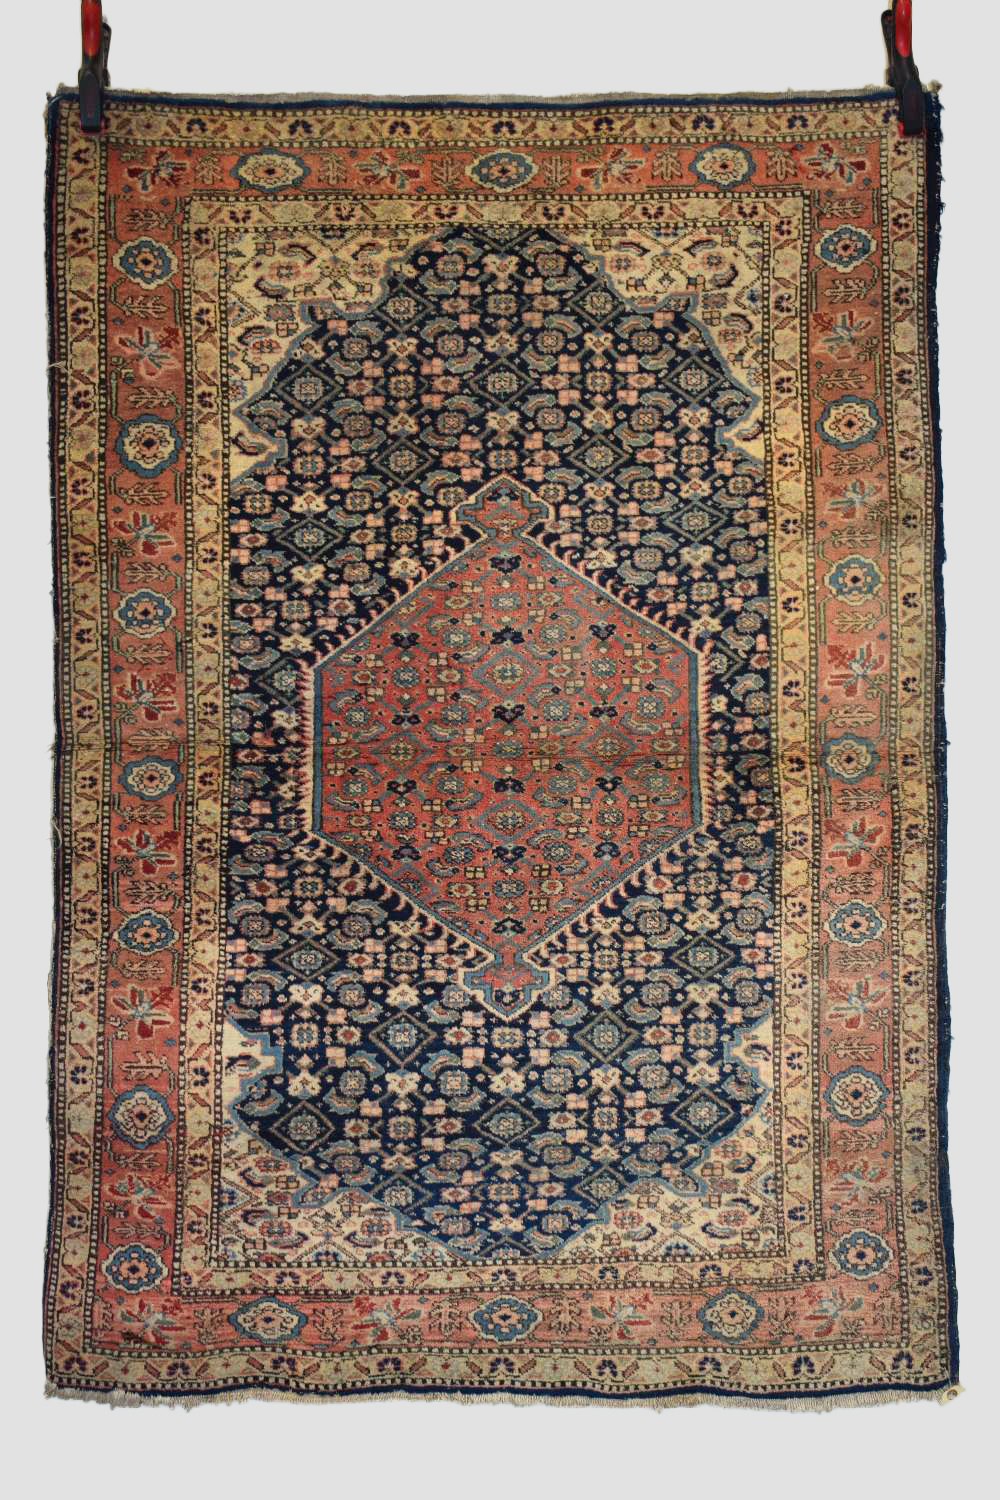 North west Persian rug, Ardabil or Tabriz district, circa 1950s, 5ft. 2in. X 3ft. 7in. 1.58m. X 1.